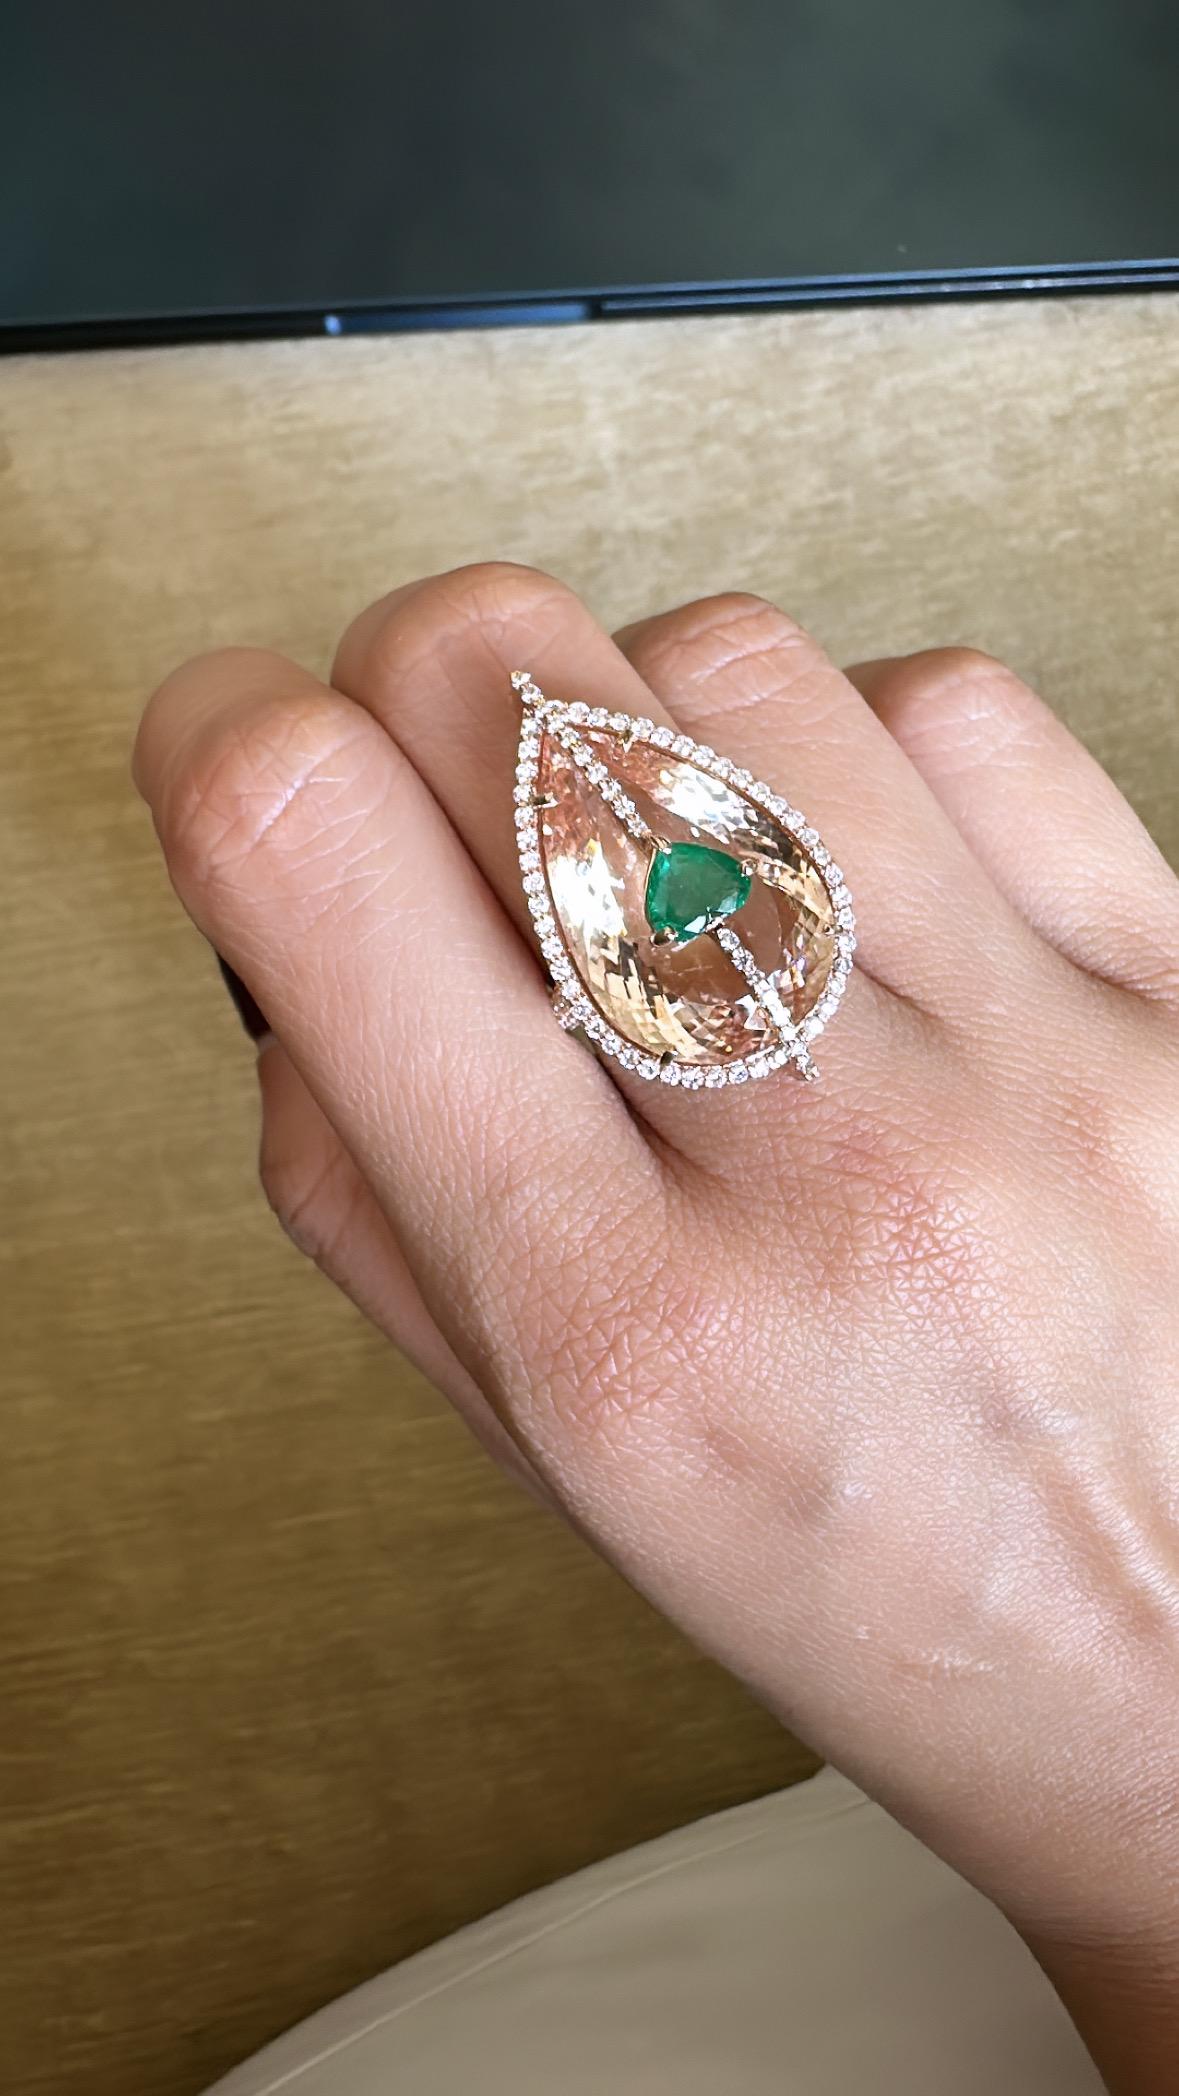 Set in 18K Gold, 21.25 carats Morganite, Zambian Emerald & Diamond Cocktail Ring For Sale 1